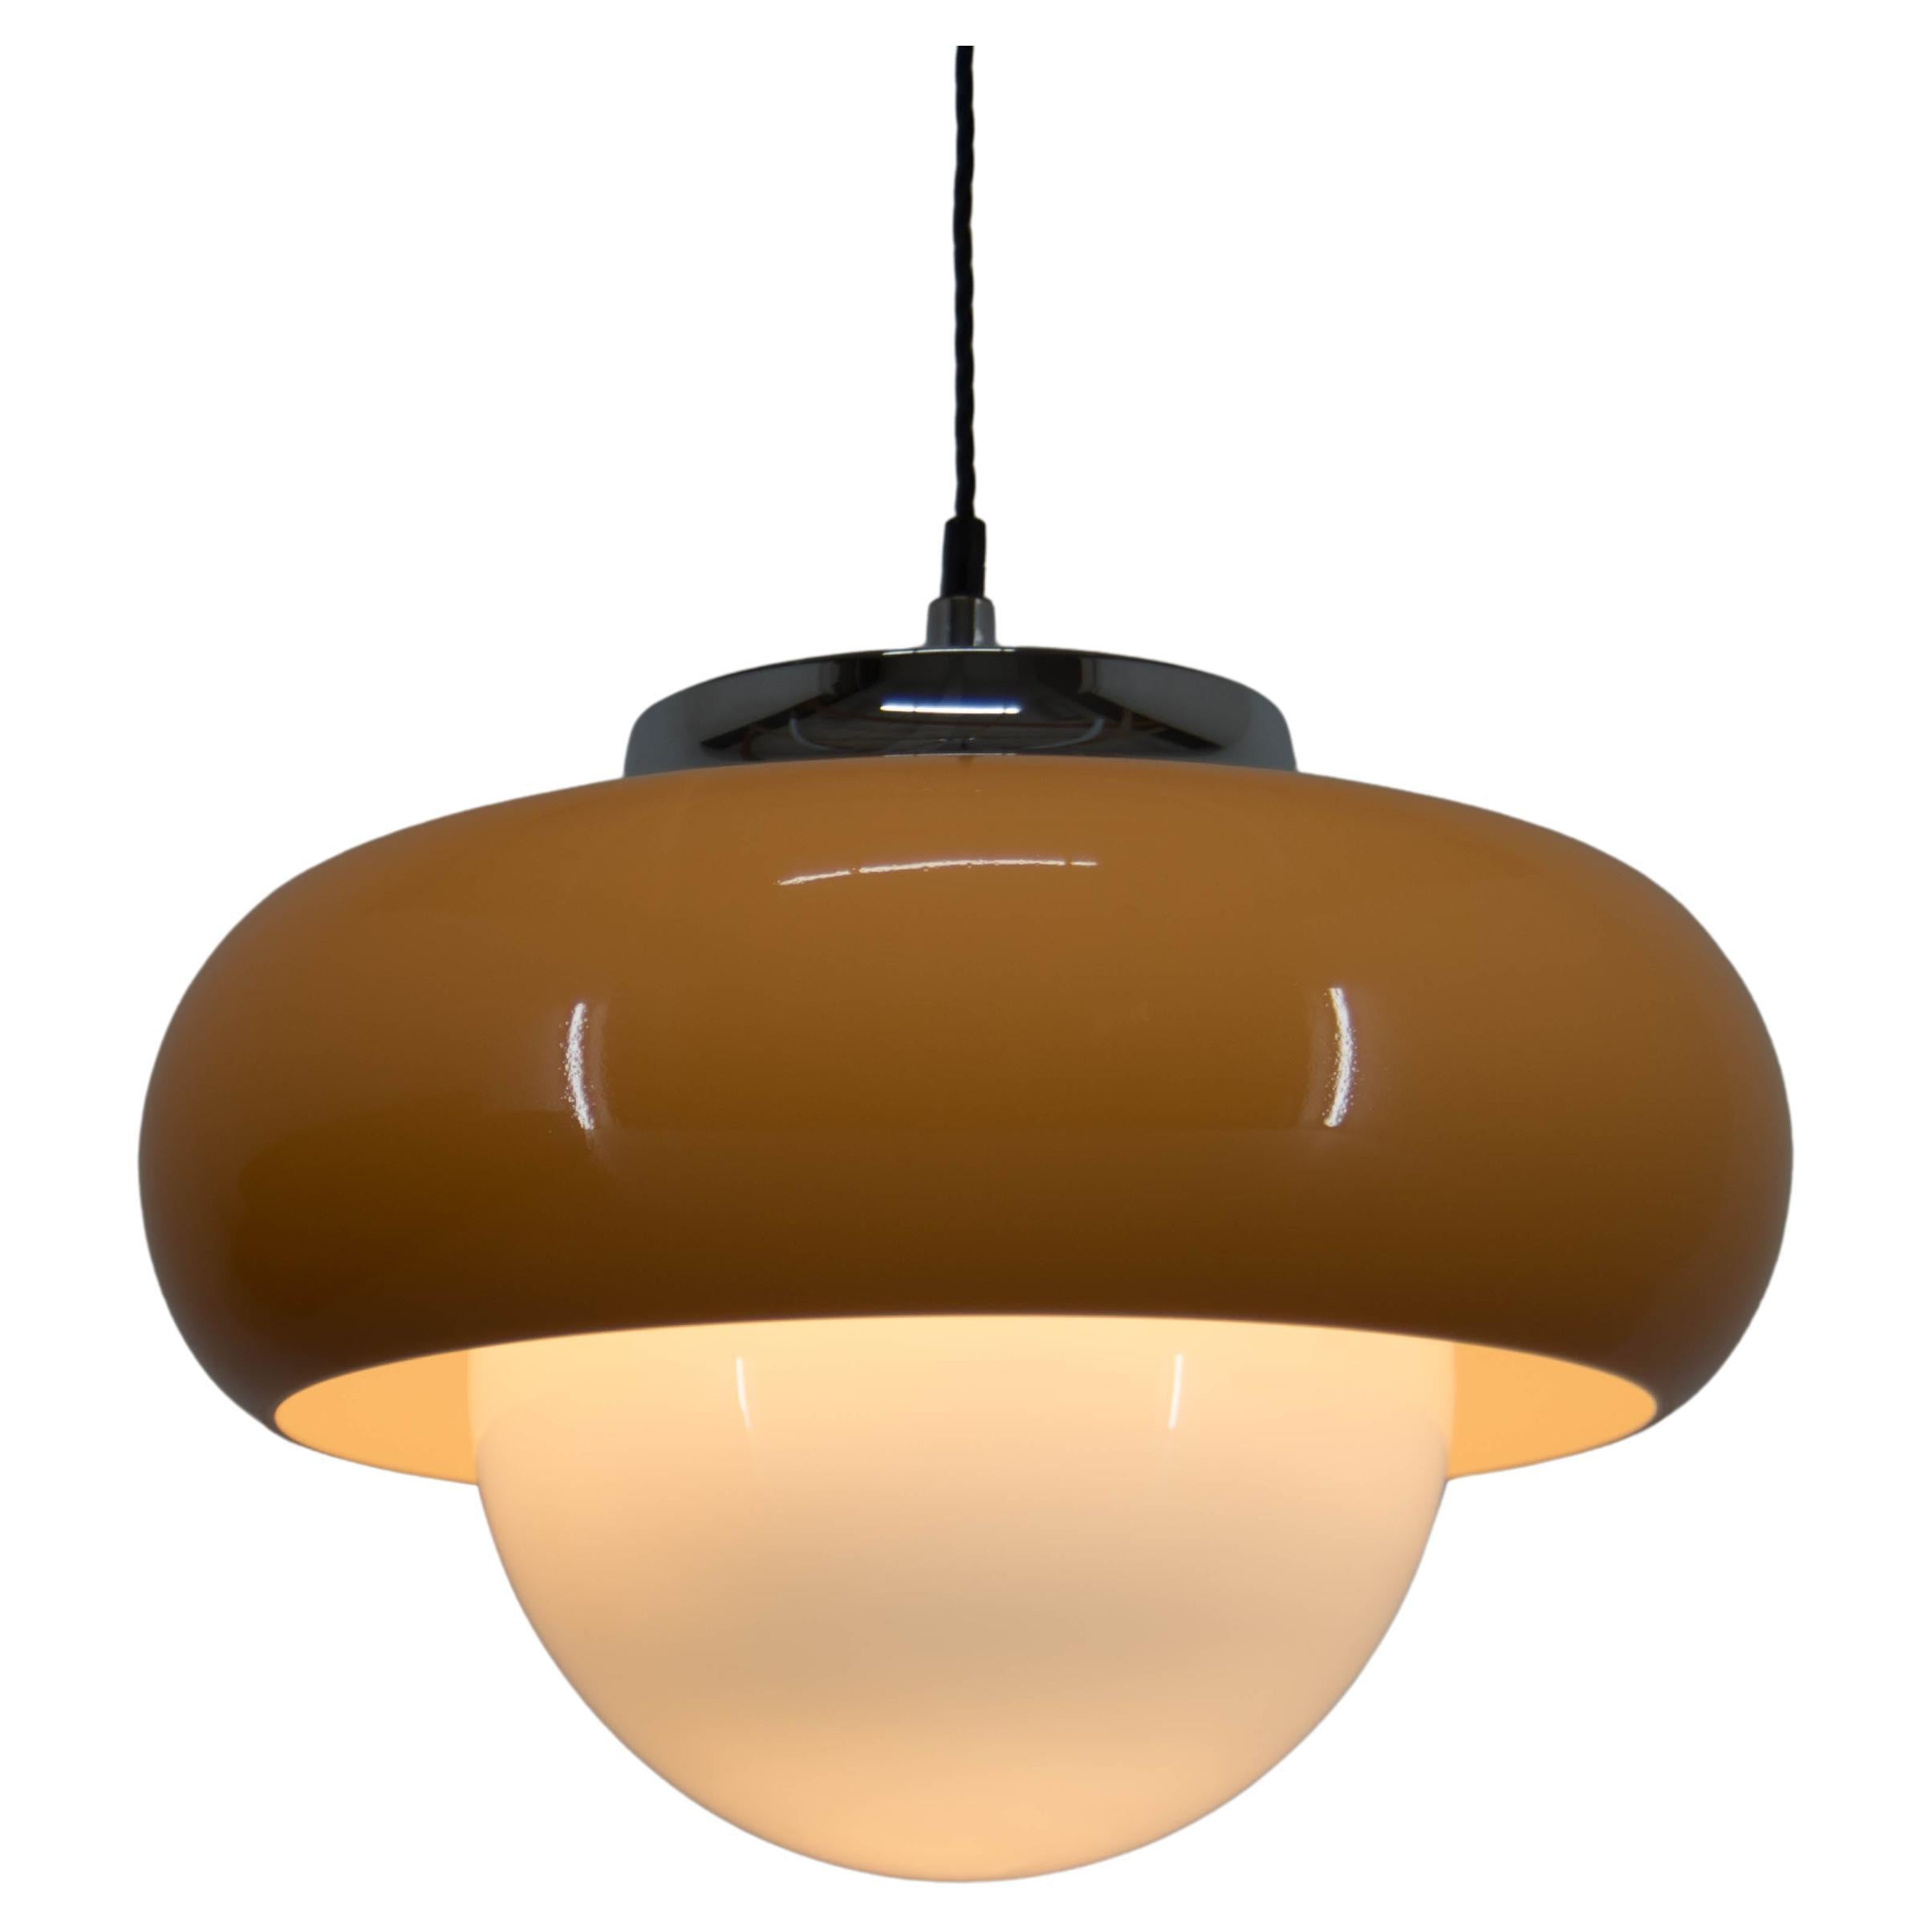 Big pendant by Meblo, Italy
Beige plastic shade and milk glass globe.
Chrome ceiling canopy
Textile cable can be shorten
Excellent condition
Rewired:
1x60W, E25-E27 bulb
US wiring compatible.
  